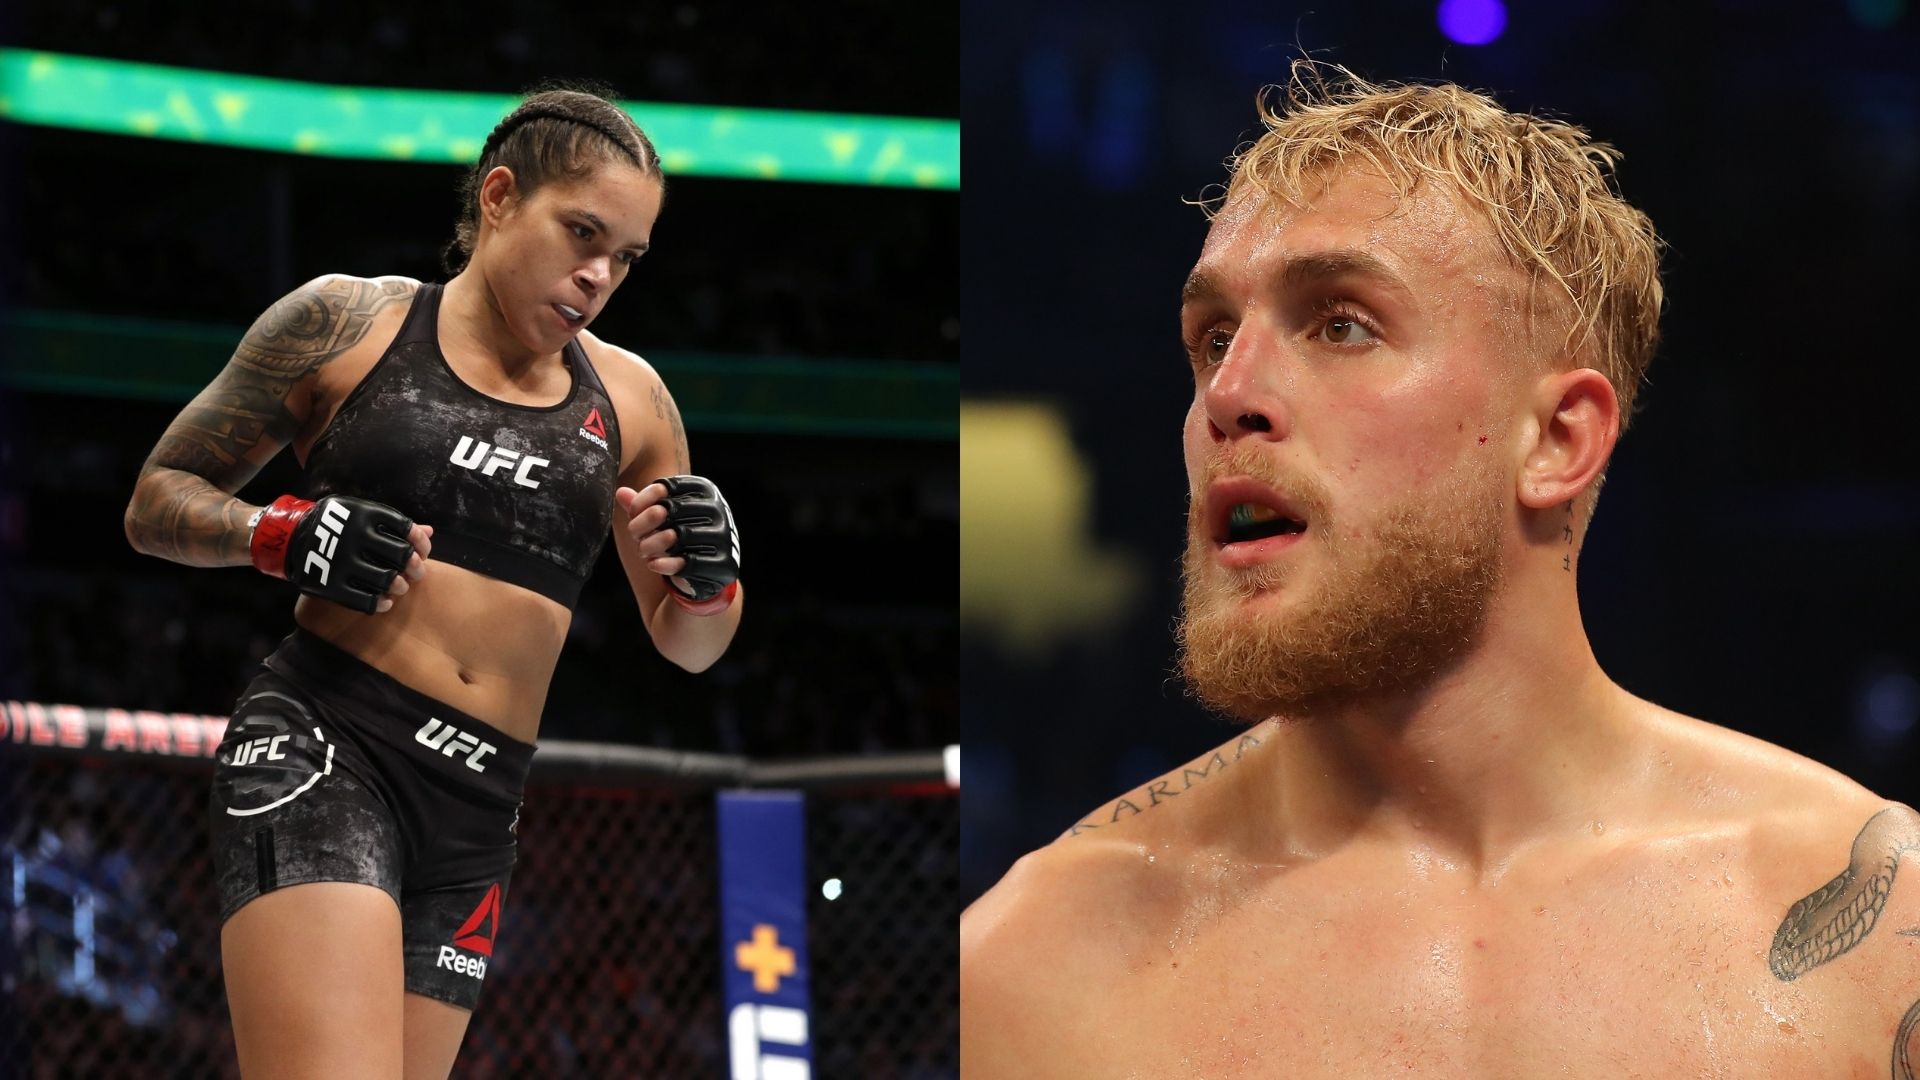 Jake Paul has been called out by Amanda Nunes